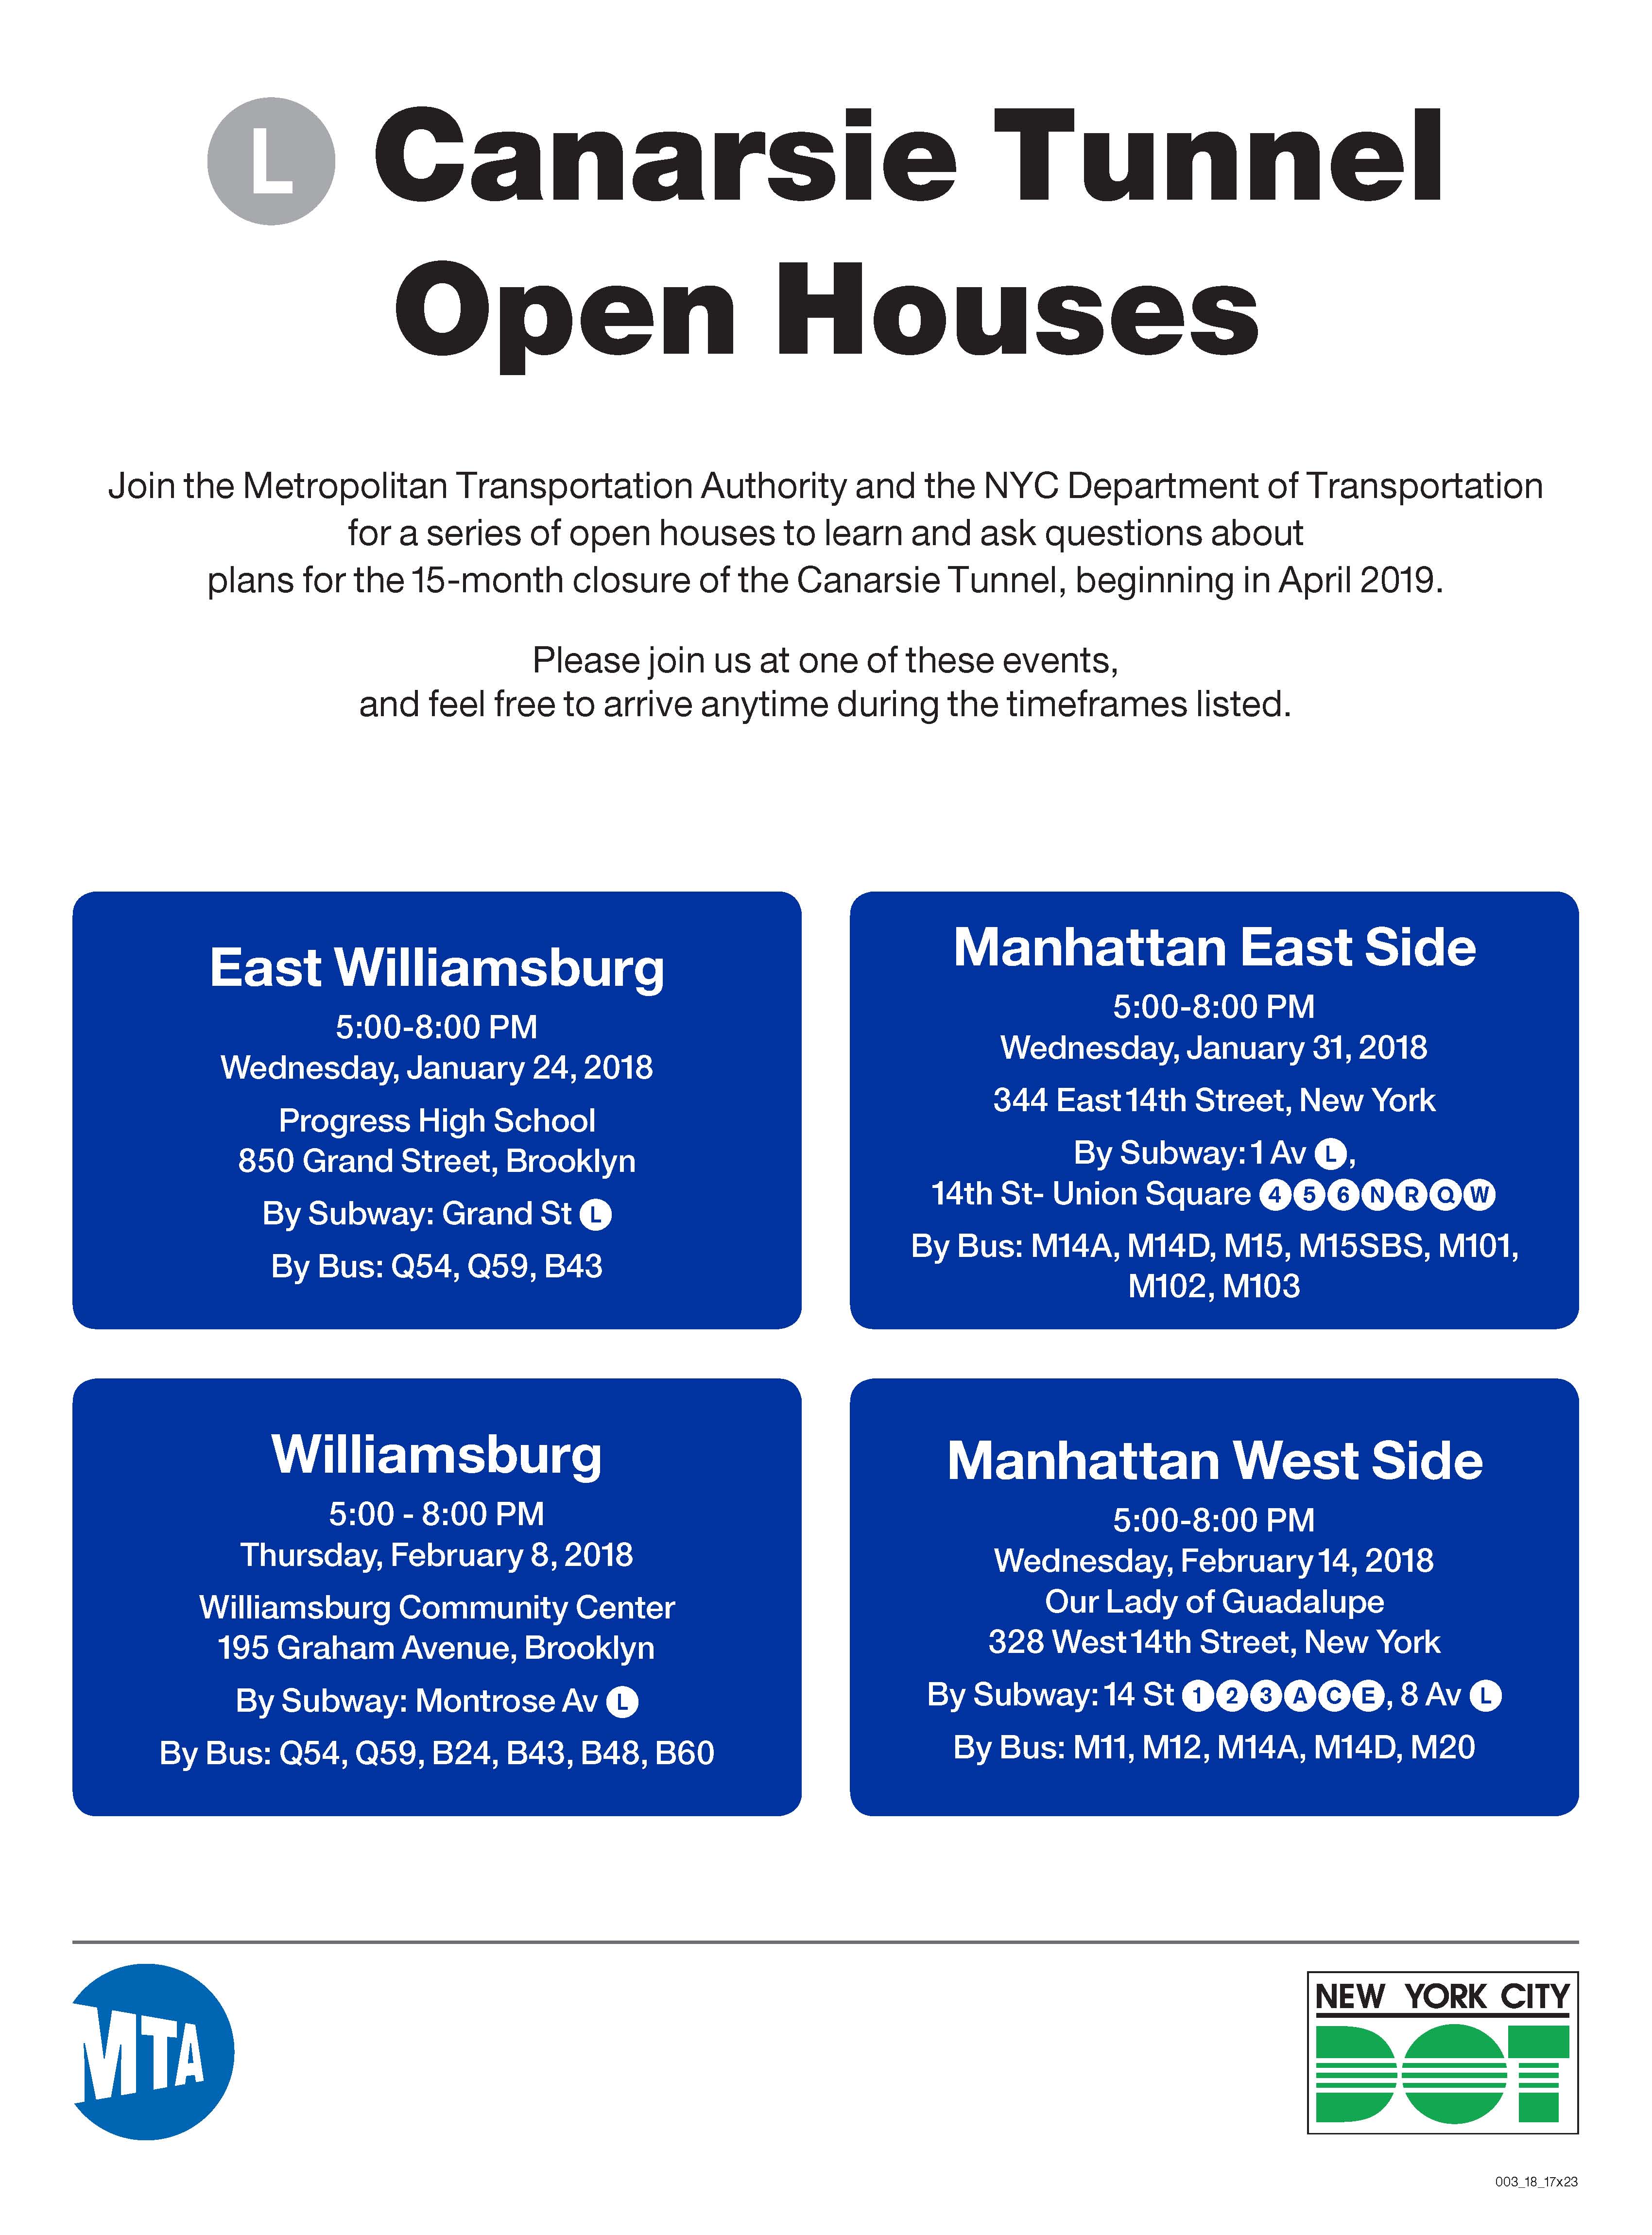 L Canarsie Tunnel Open Houses 2018